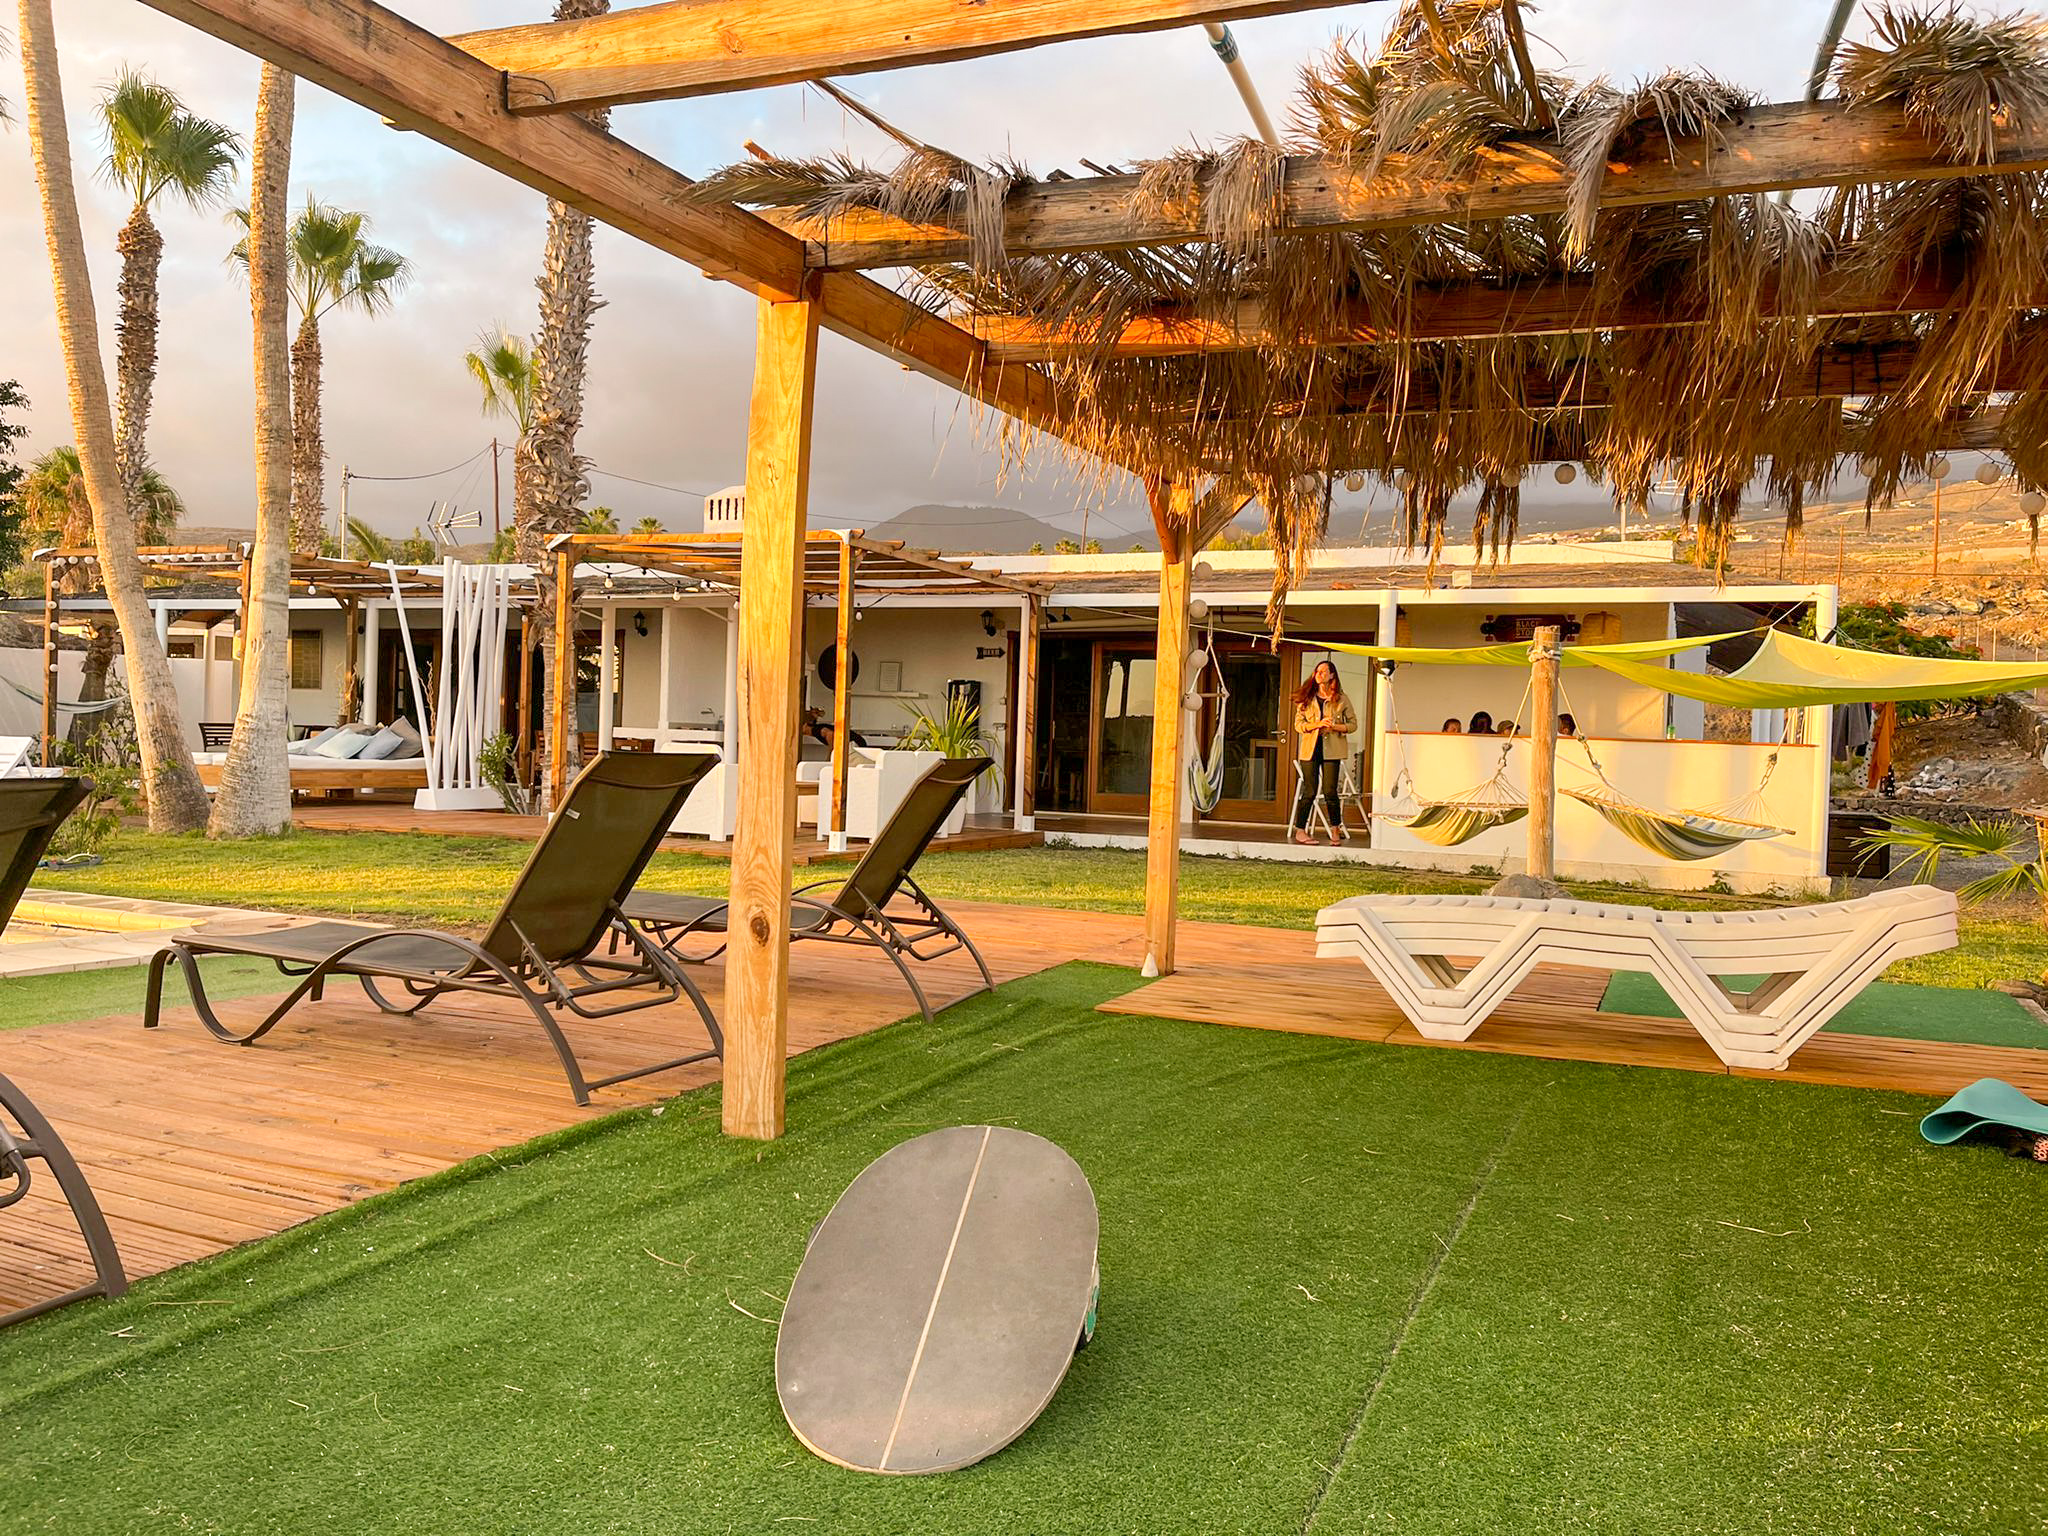 Play and enjoy at the Blackstone surfcamp in Tenerife in Canary Islands